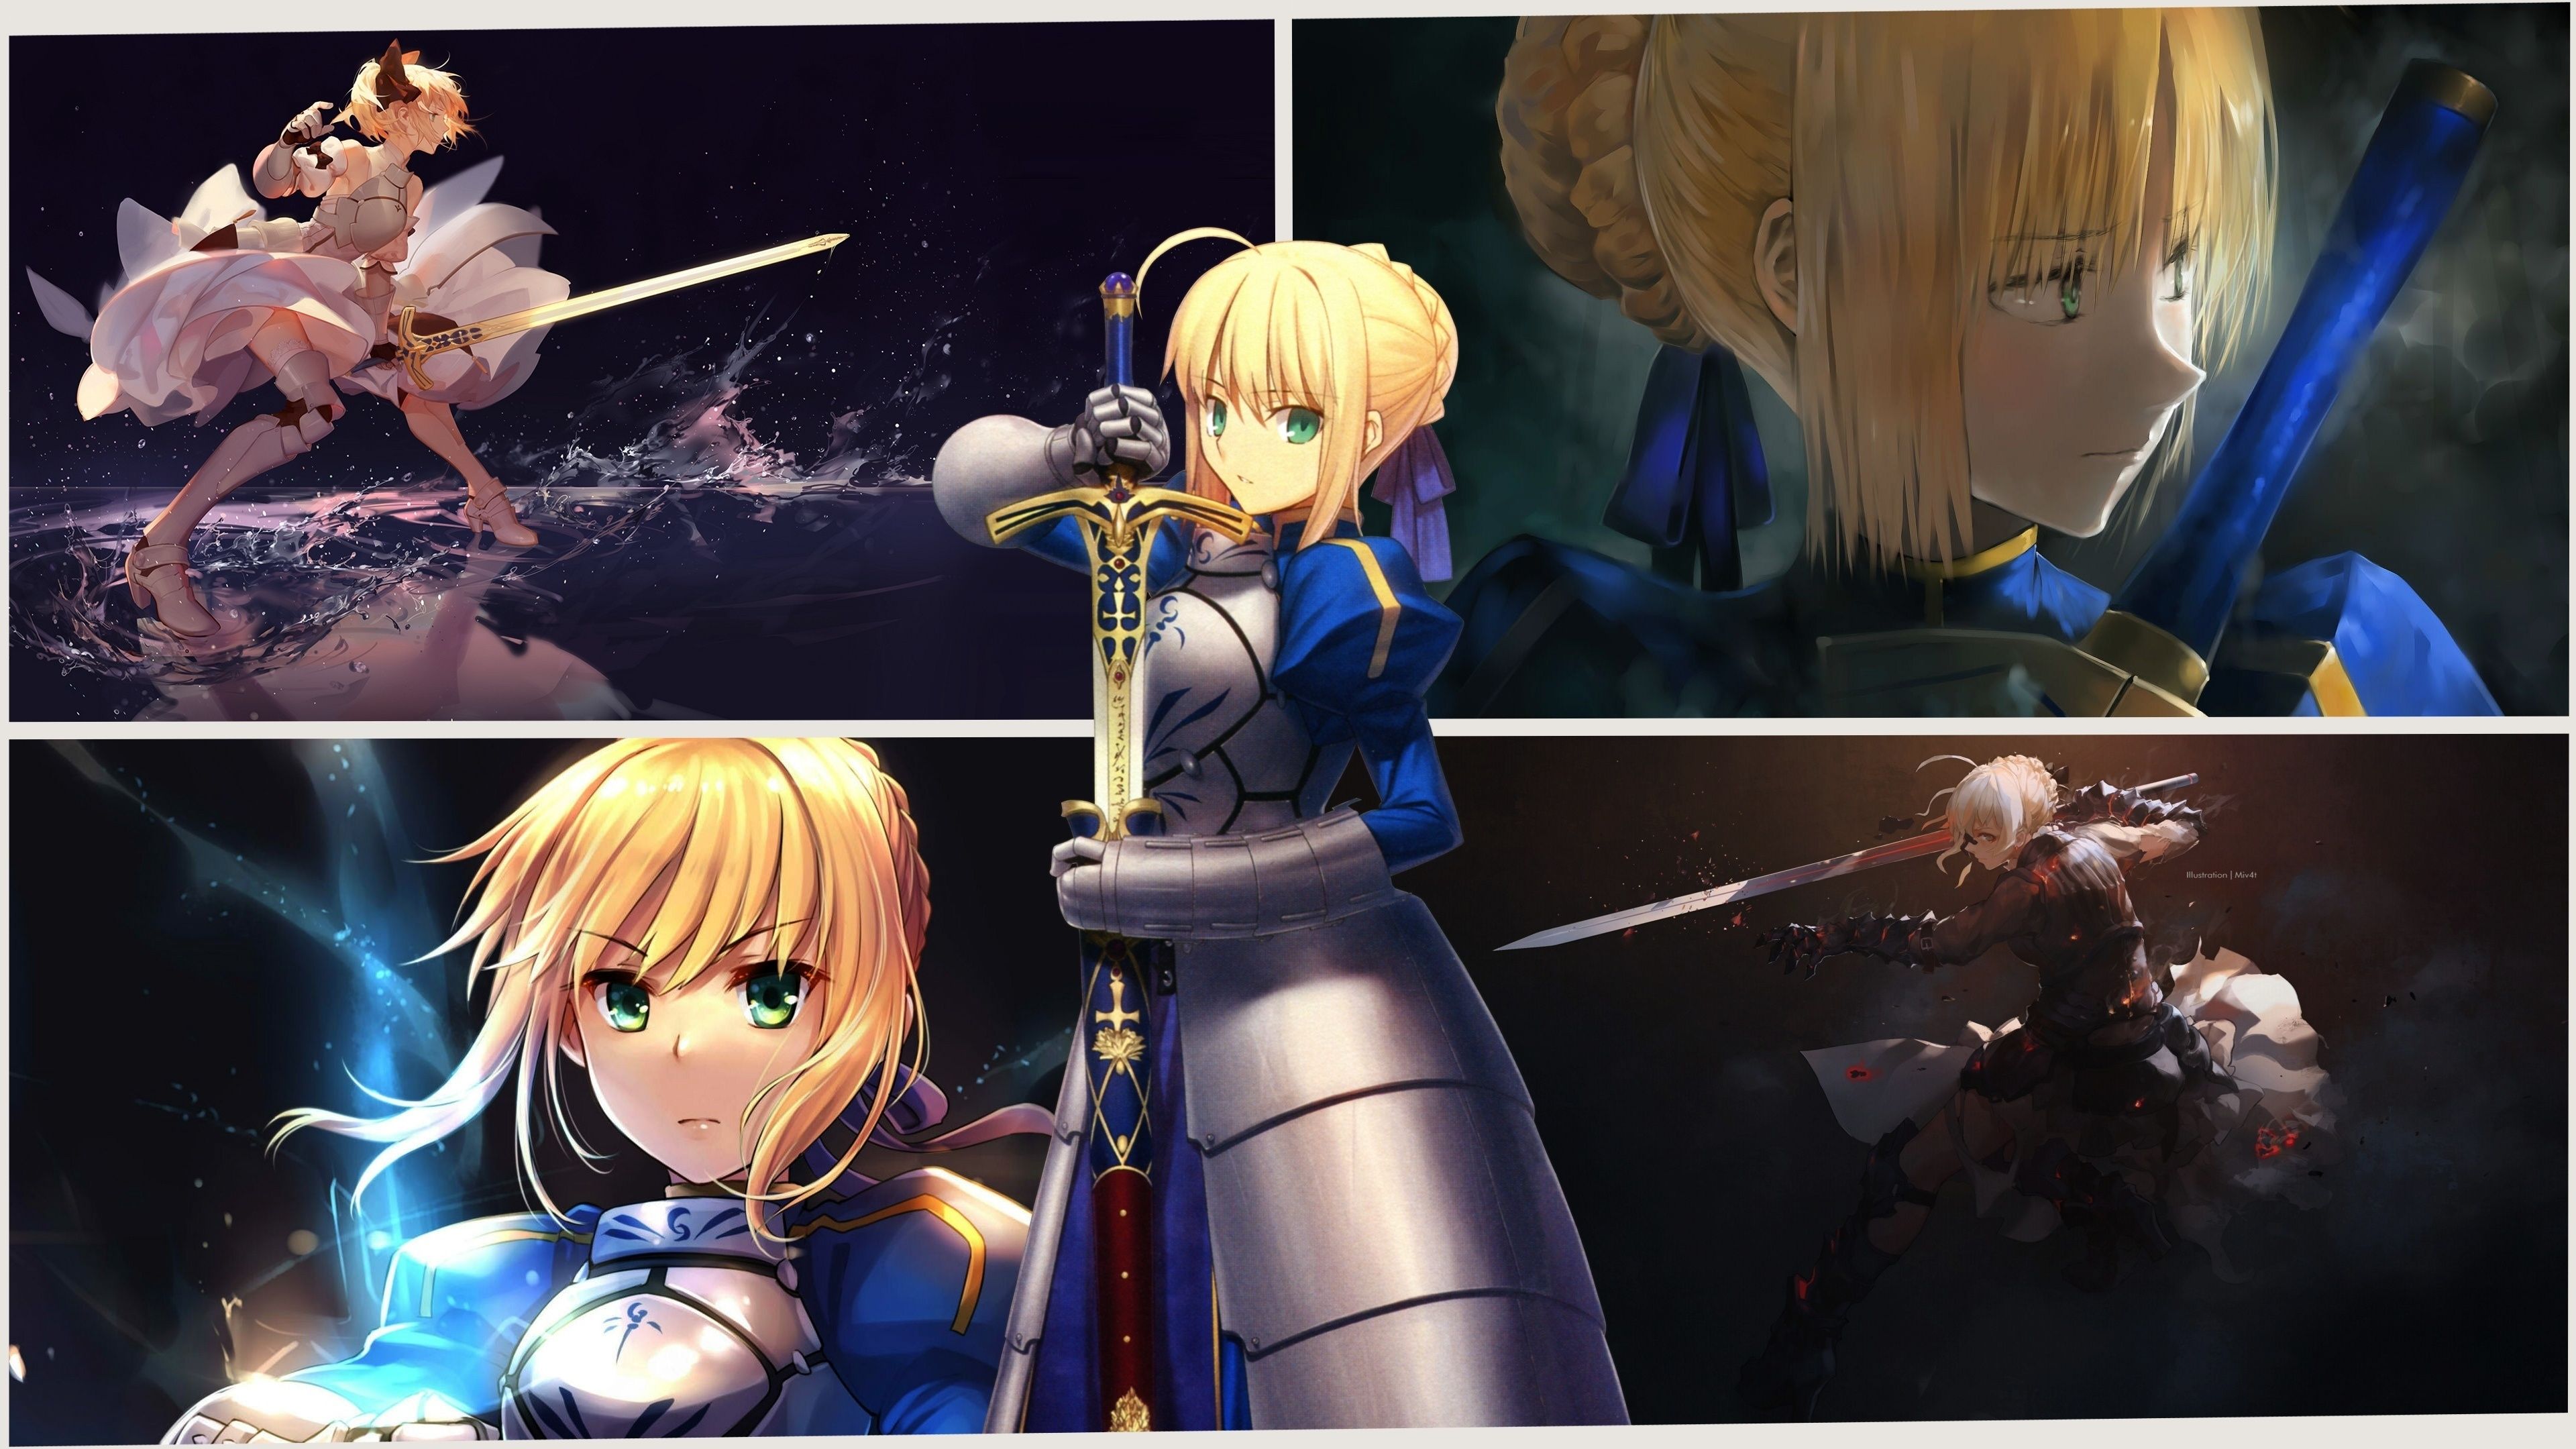 Download 3840x2400 Wallpaper Collage, Saber Alter, Angry, Anime Girl, Fate Stay Night, 4k, Ultra HD 16: Widescreen, 3840x2400 HD Image, Background, 6164